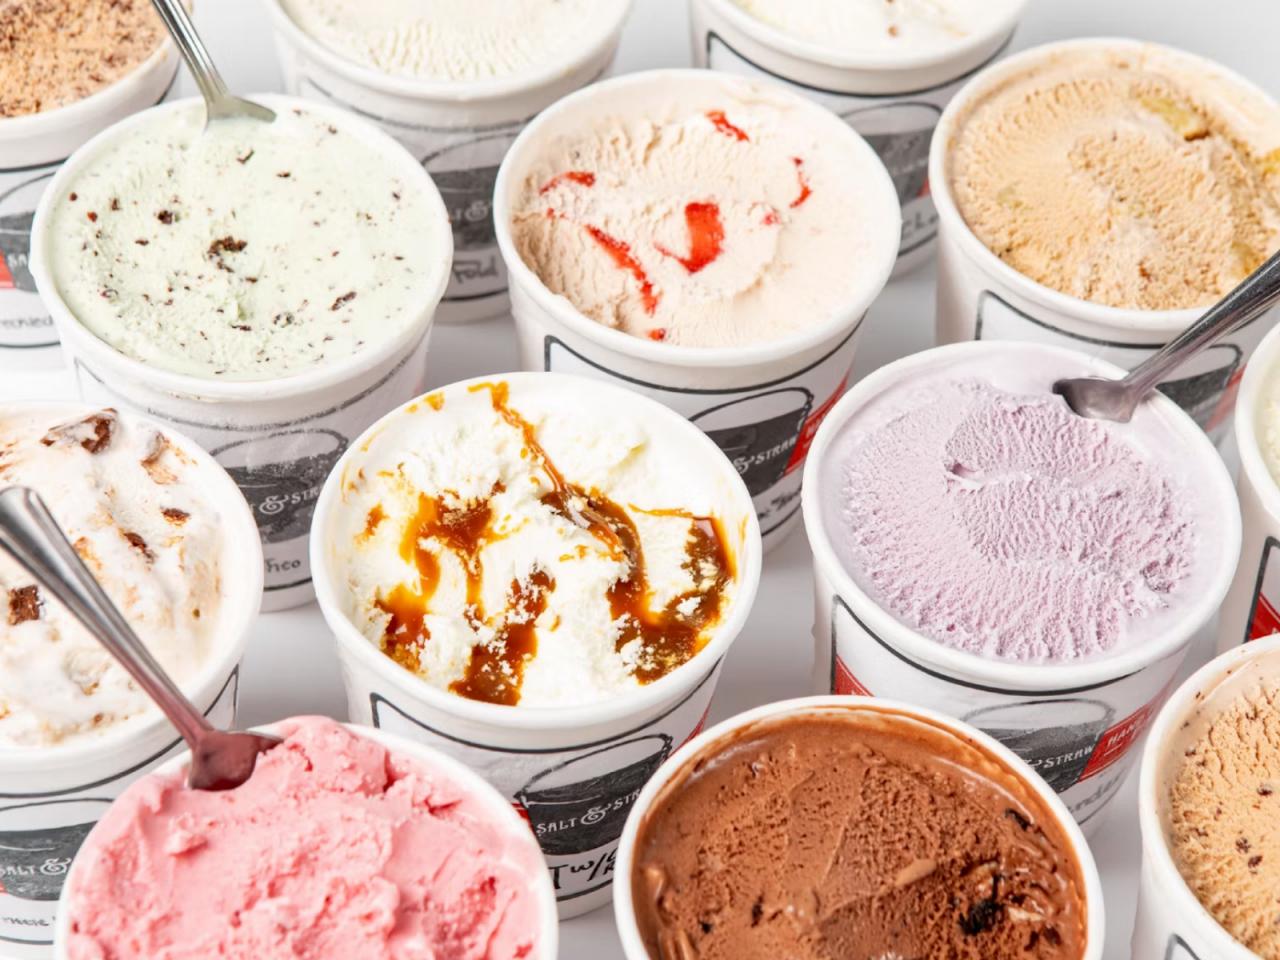 Halo Top Cofounder Eats the Ice Cream Daily, but Warns Against